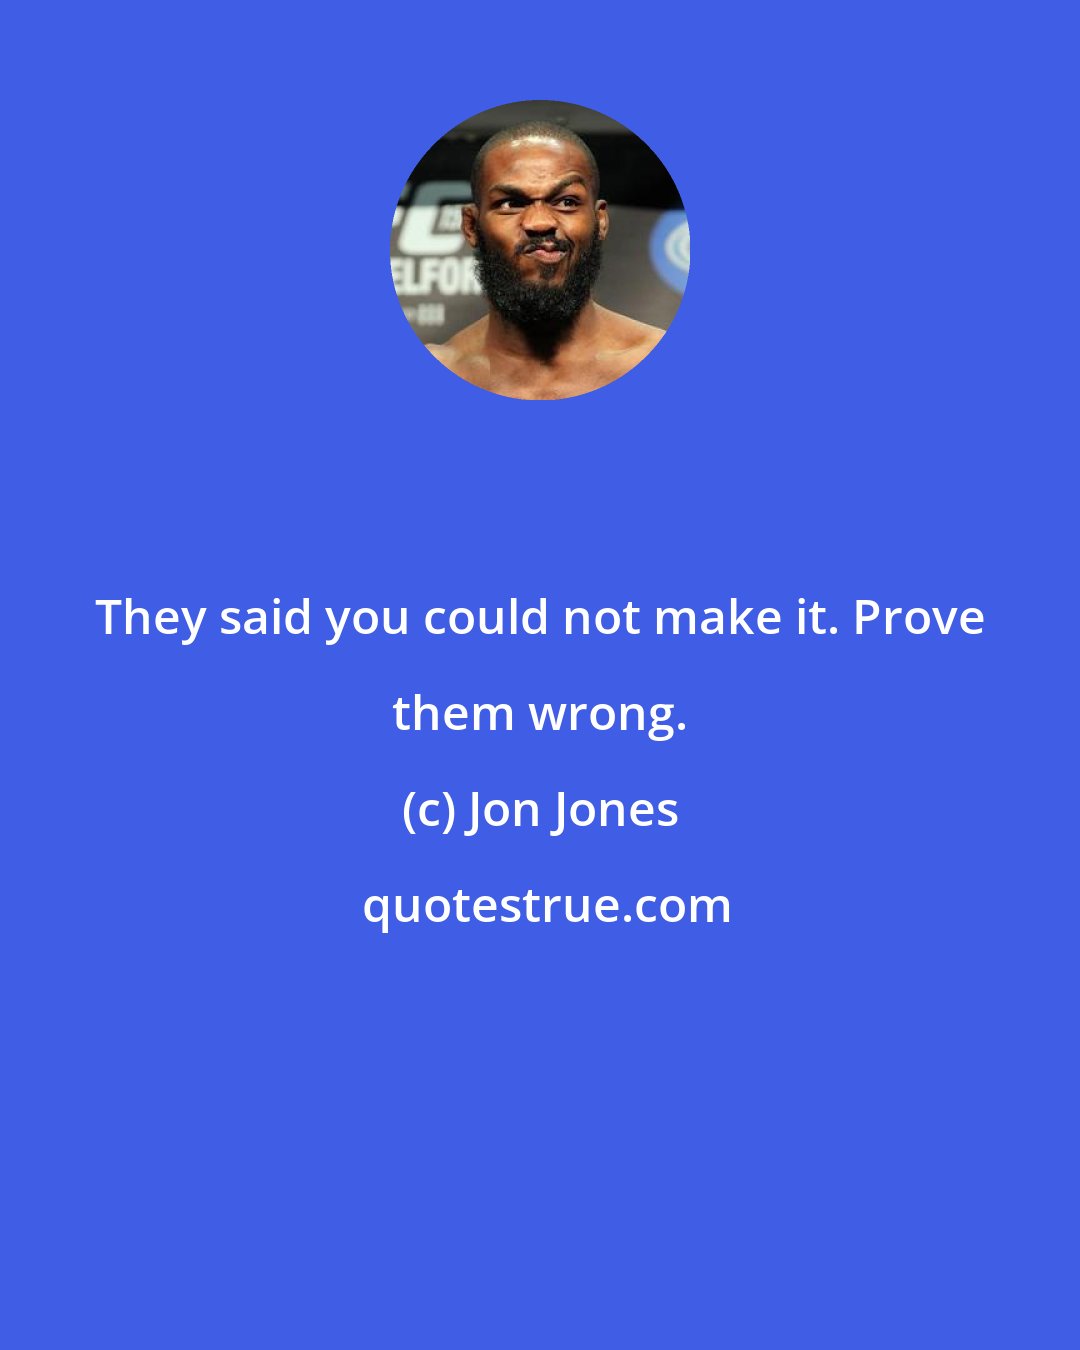 Jon Jones: They said you could not make it. Prove them wrong.